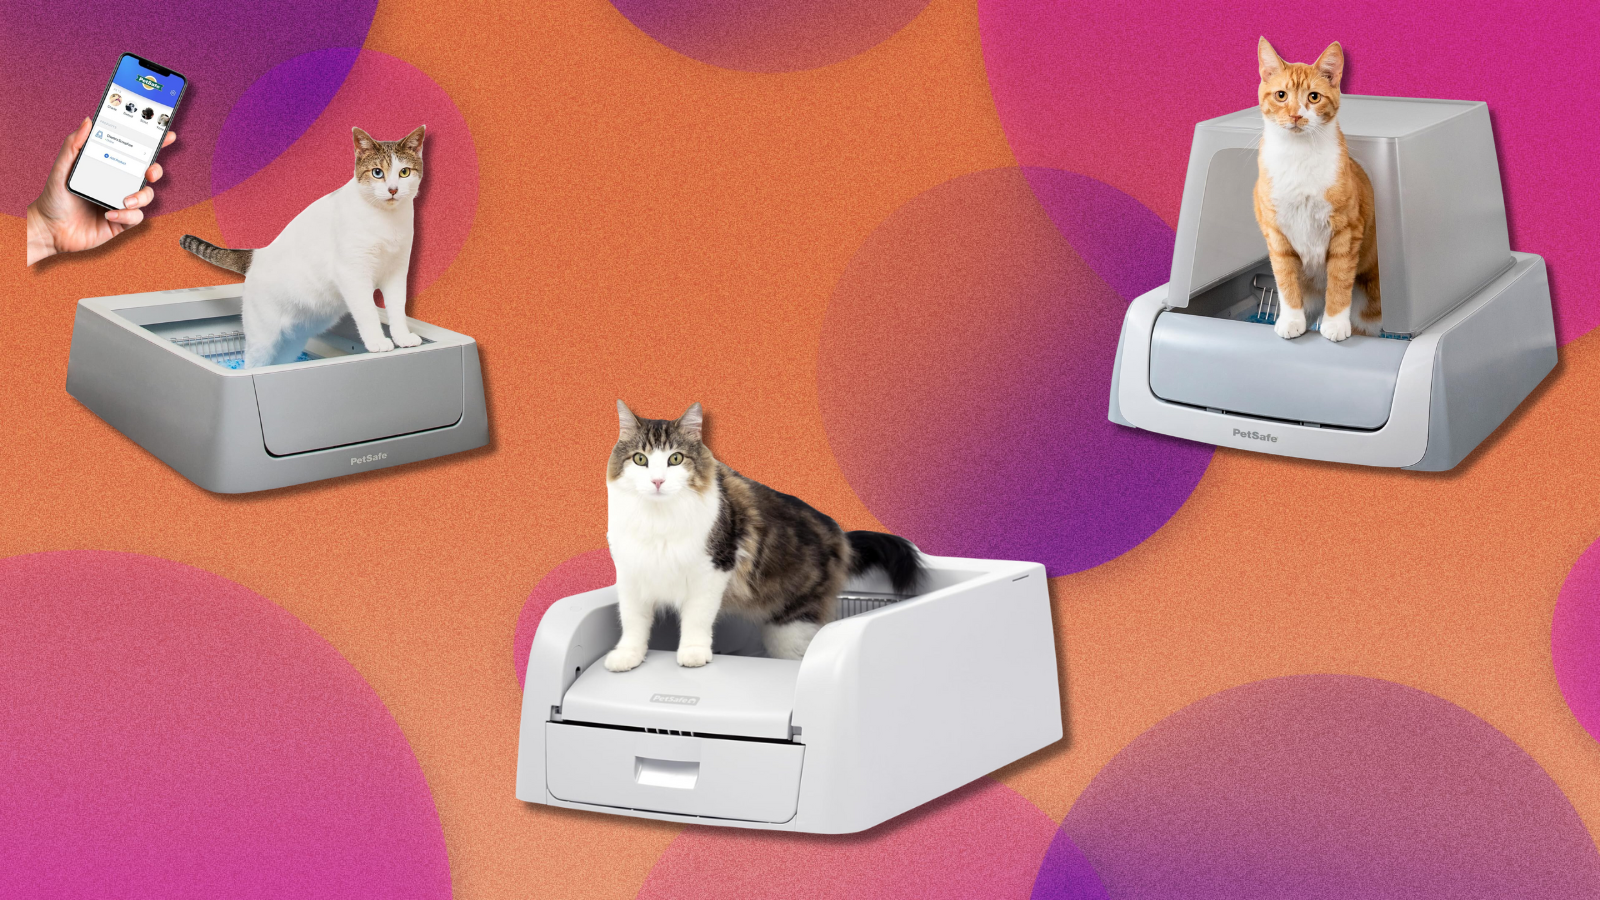 Cats in self-scooping litter boxes on colorful abstract background